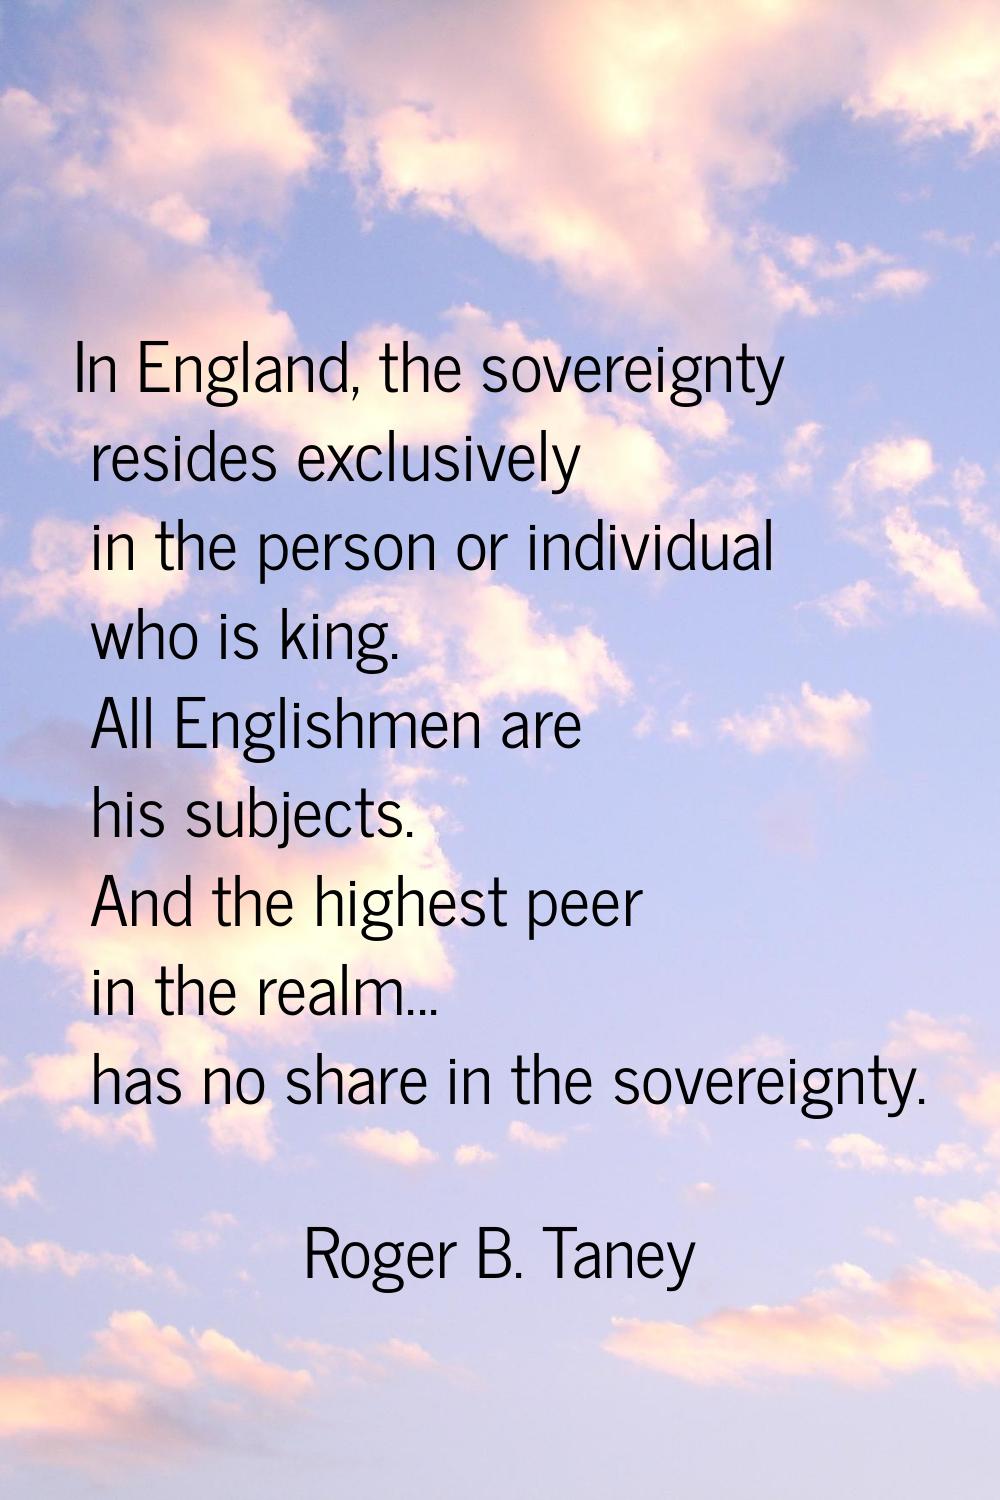 In England, the sovereignty resides exclusively in the person or individual who is king. All Englis